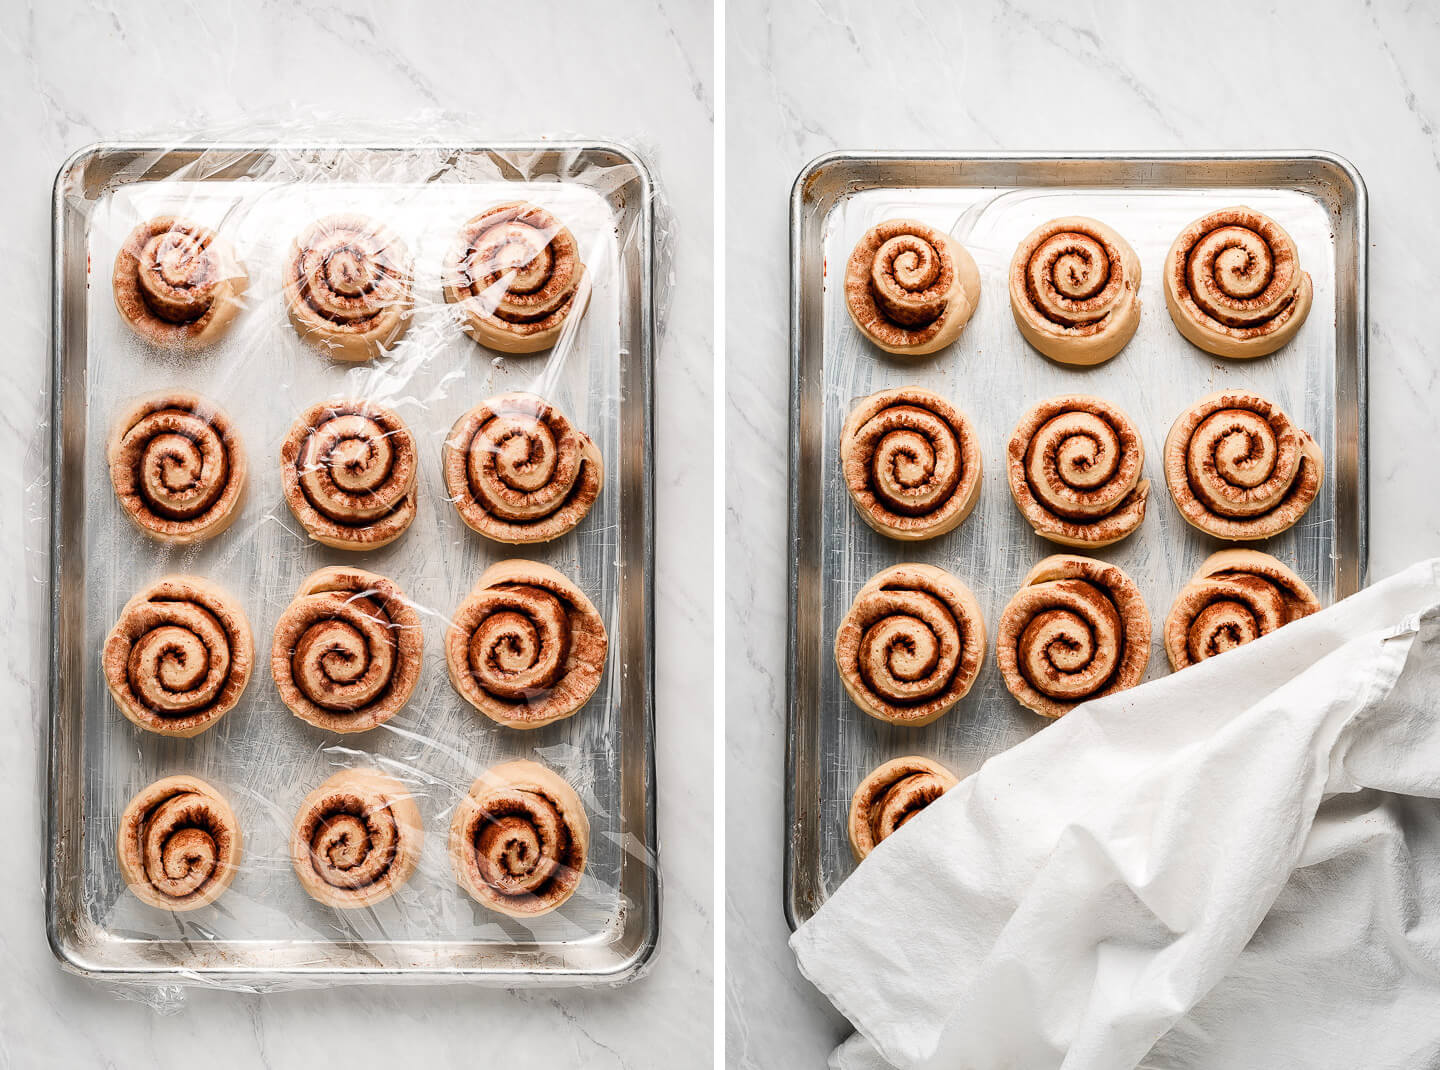 Uncooked cinnamon rolls on a baking sheet covered in plastic wrap; Rolls after being refrigerated and covered halfway with a white tea towel.